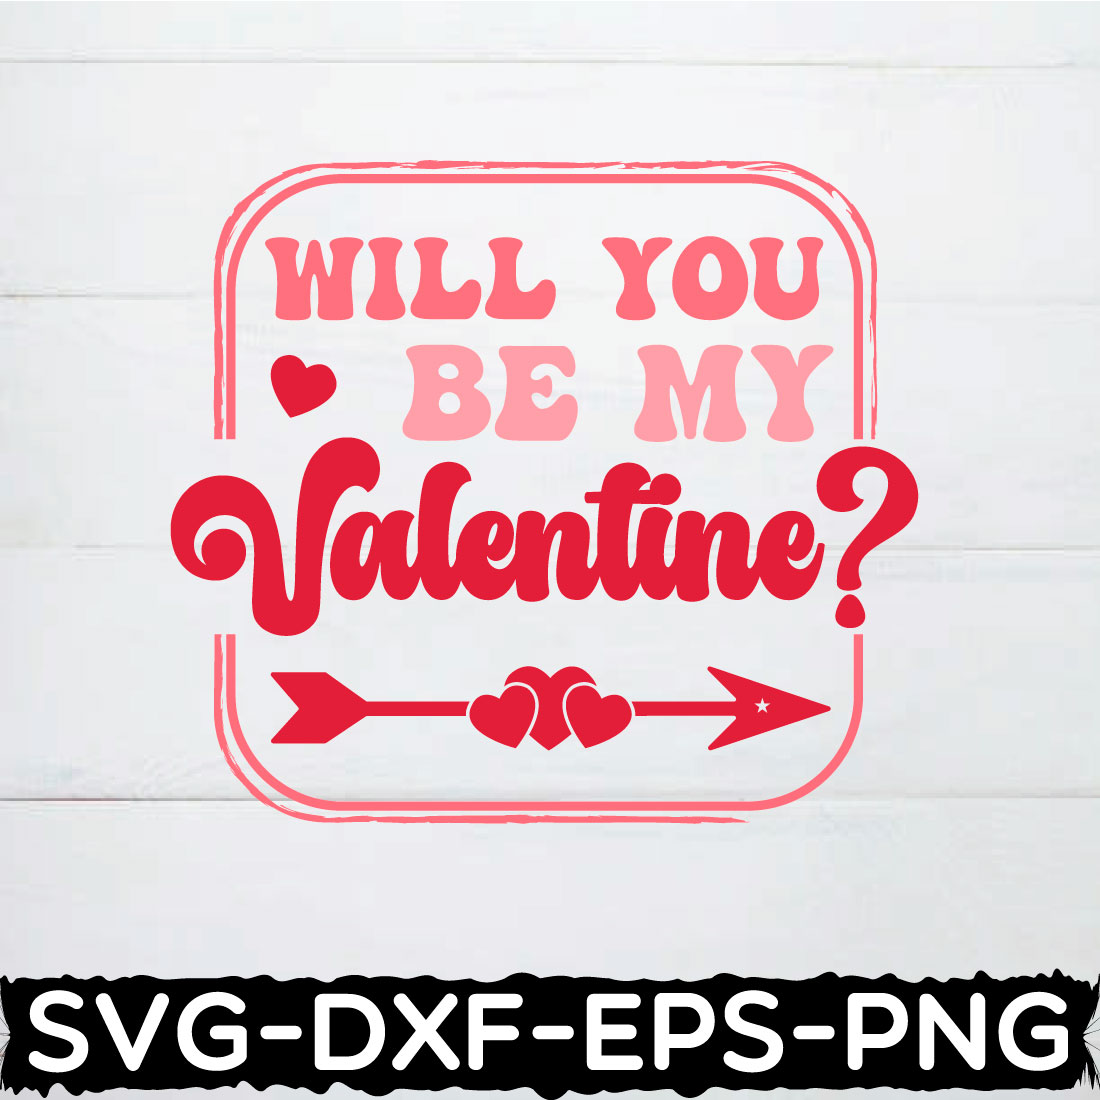 will you be my valentine? retro cover image.